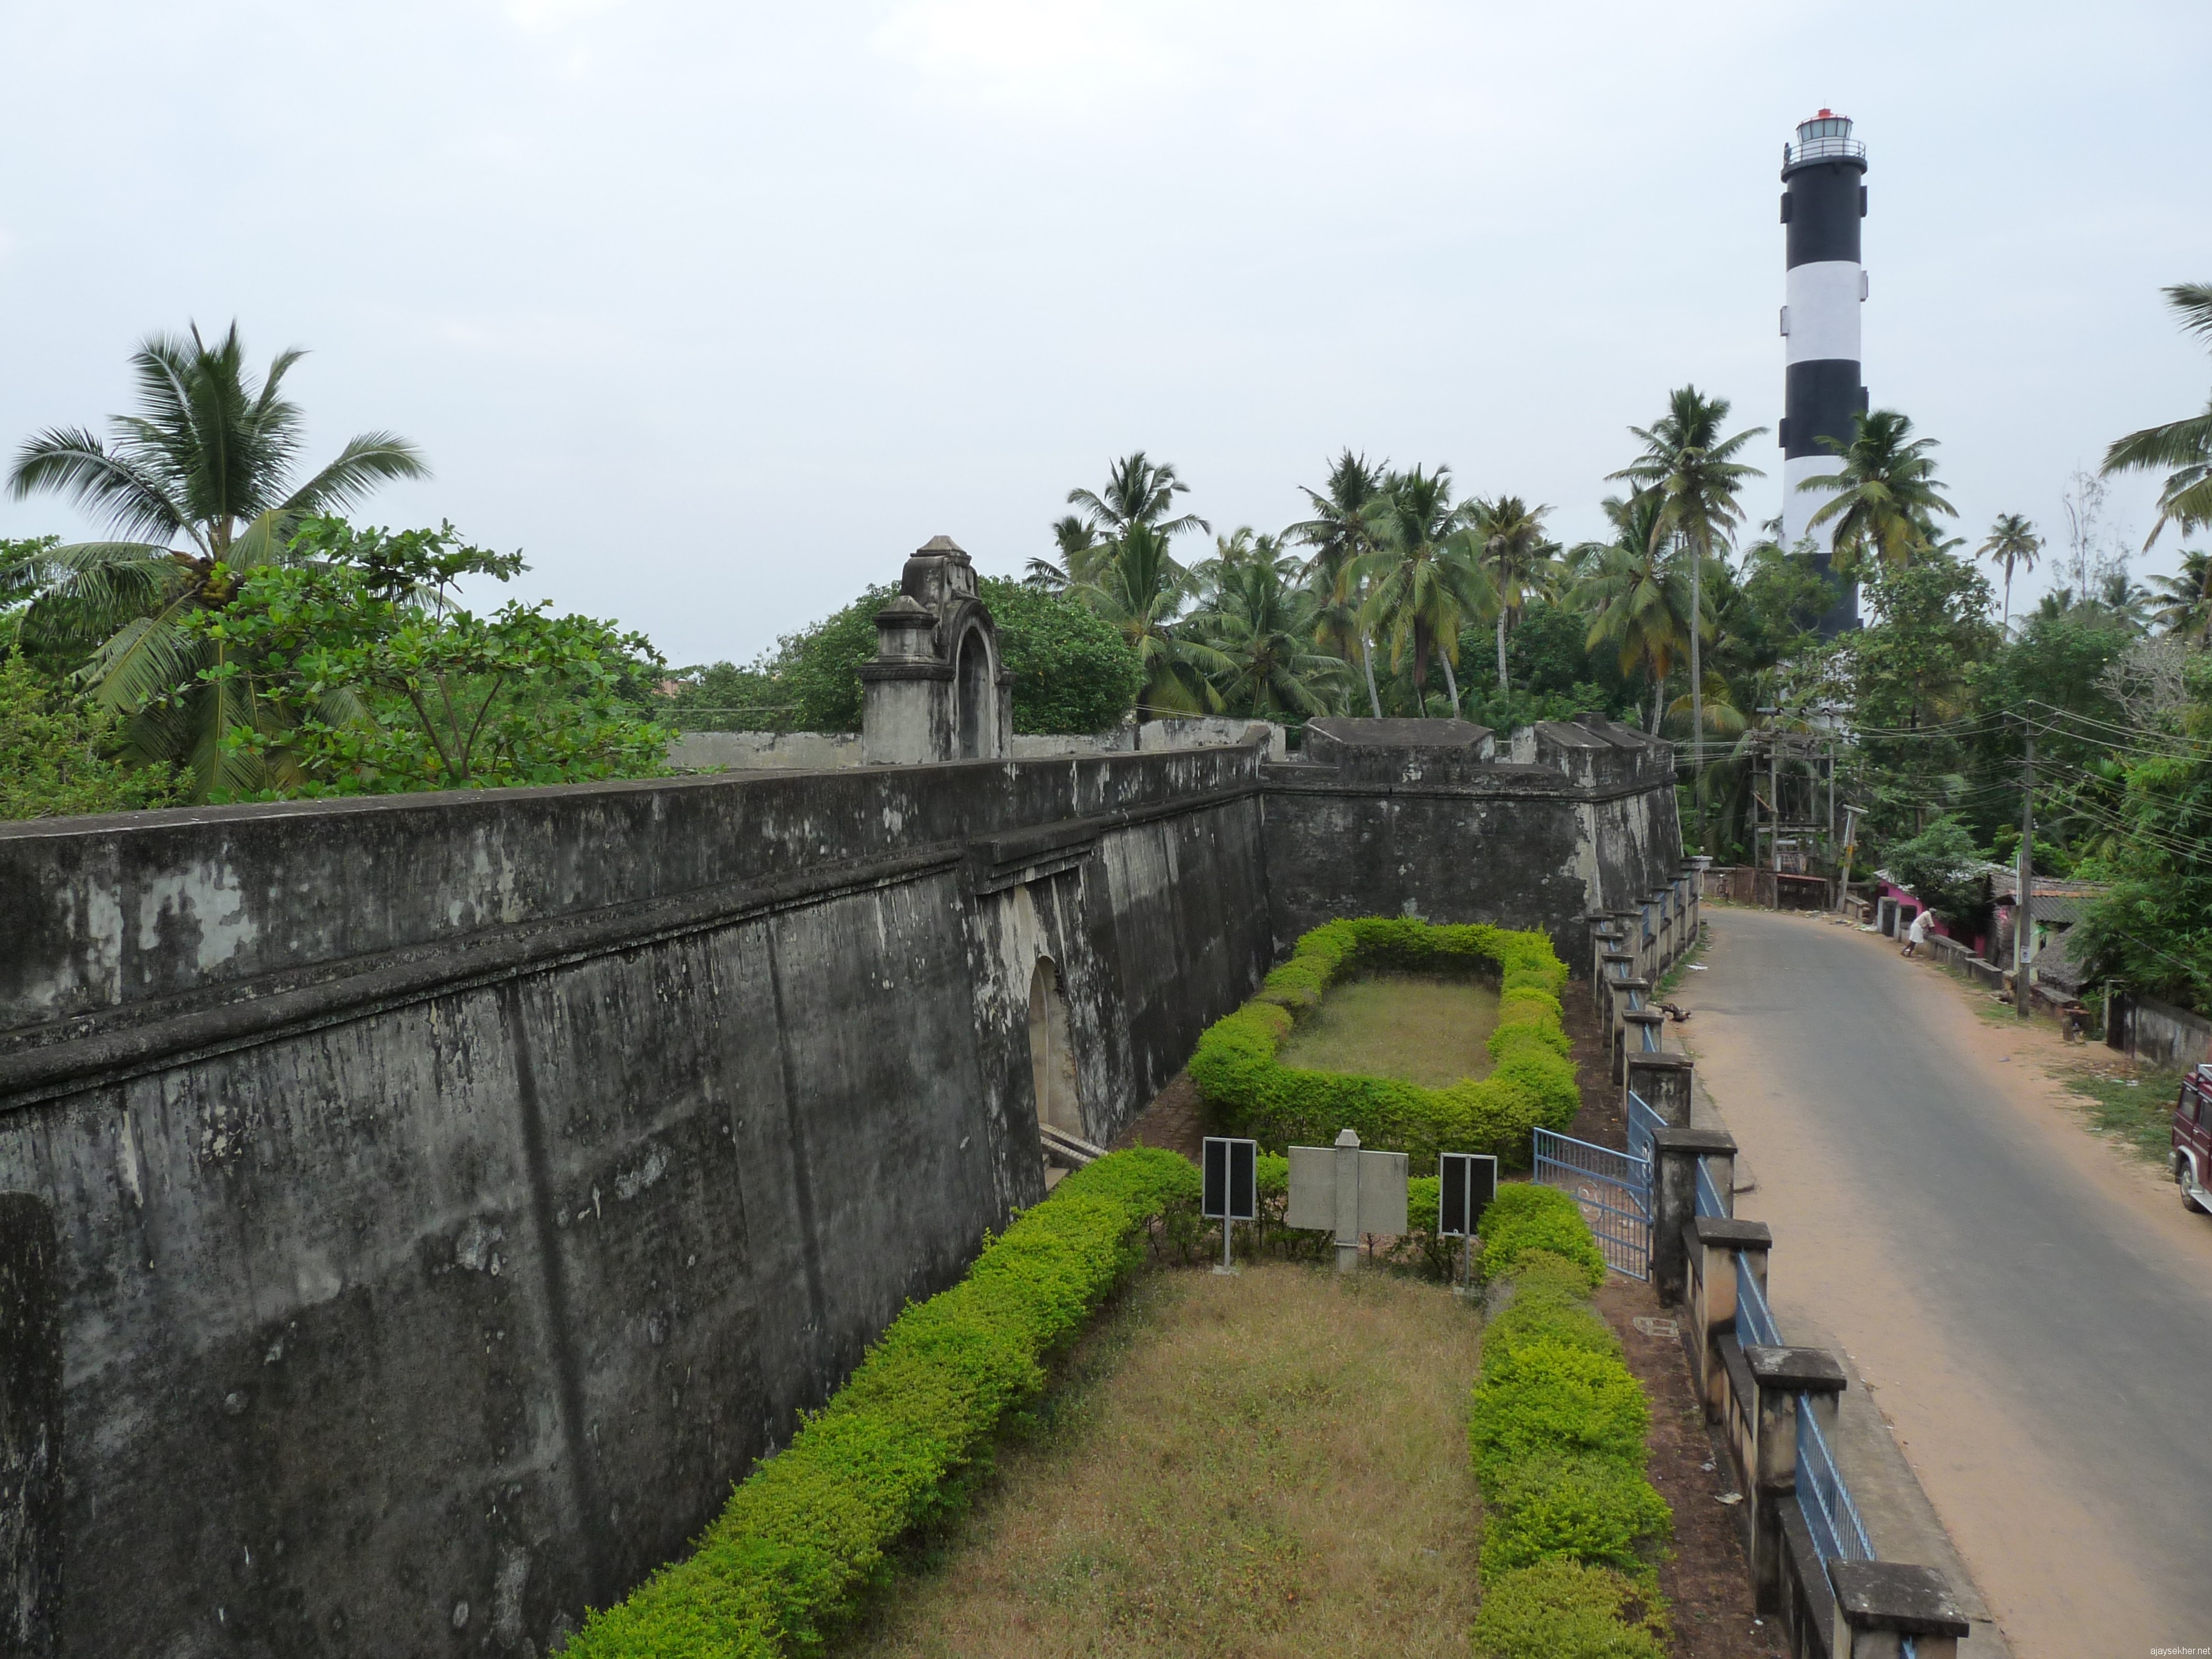 Anjengo Fort and light house south of Varkala:  A historic battle field between the colonial powers like the Dutch, French and the British.